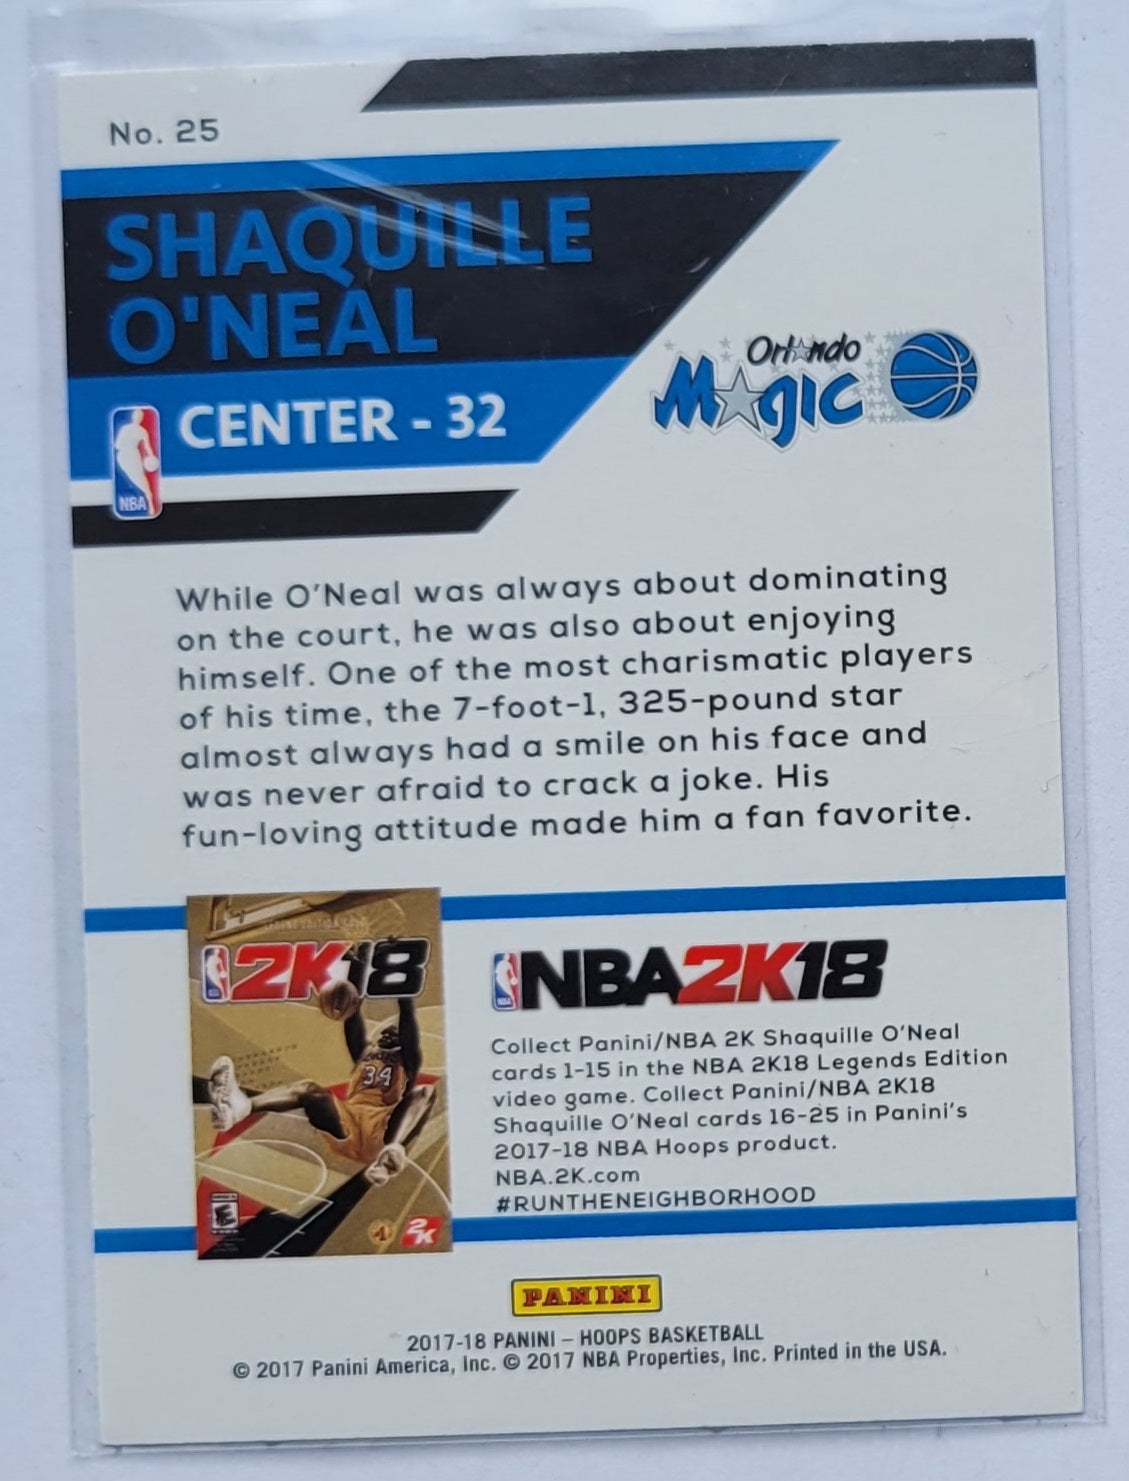 Shaquille O'Neal - 2017-18 Hoops Shaquille O'Neal NBA 2K #25